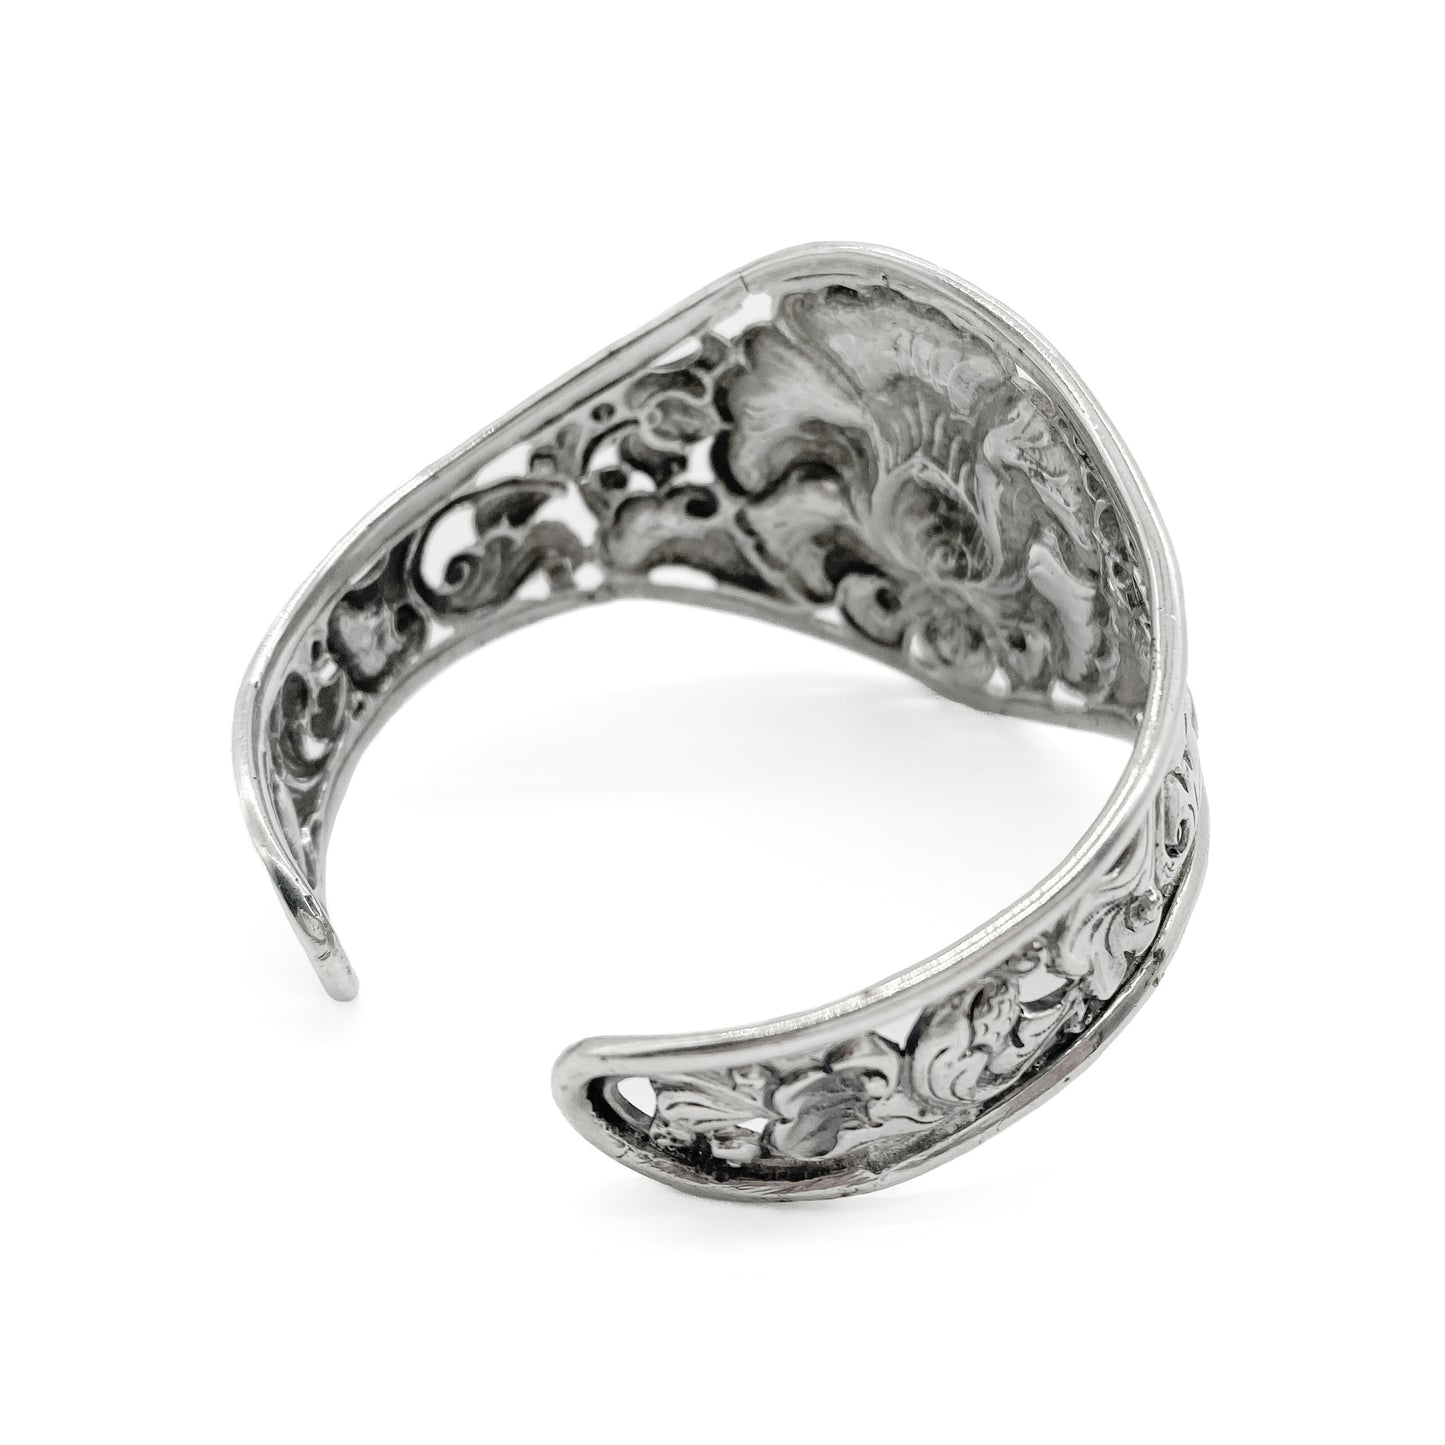 Gorgeous silver repoussé bangle with ornate detail. Open so size is adjustable. Circa 1930s